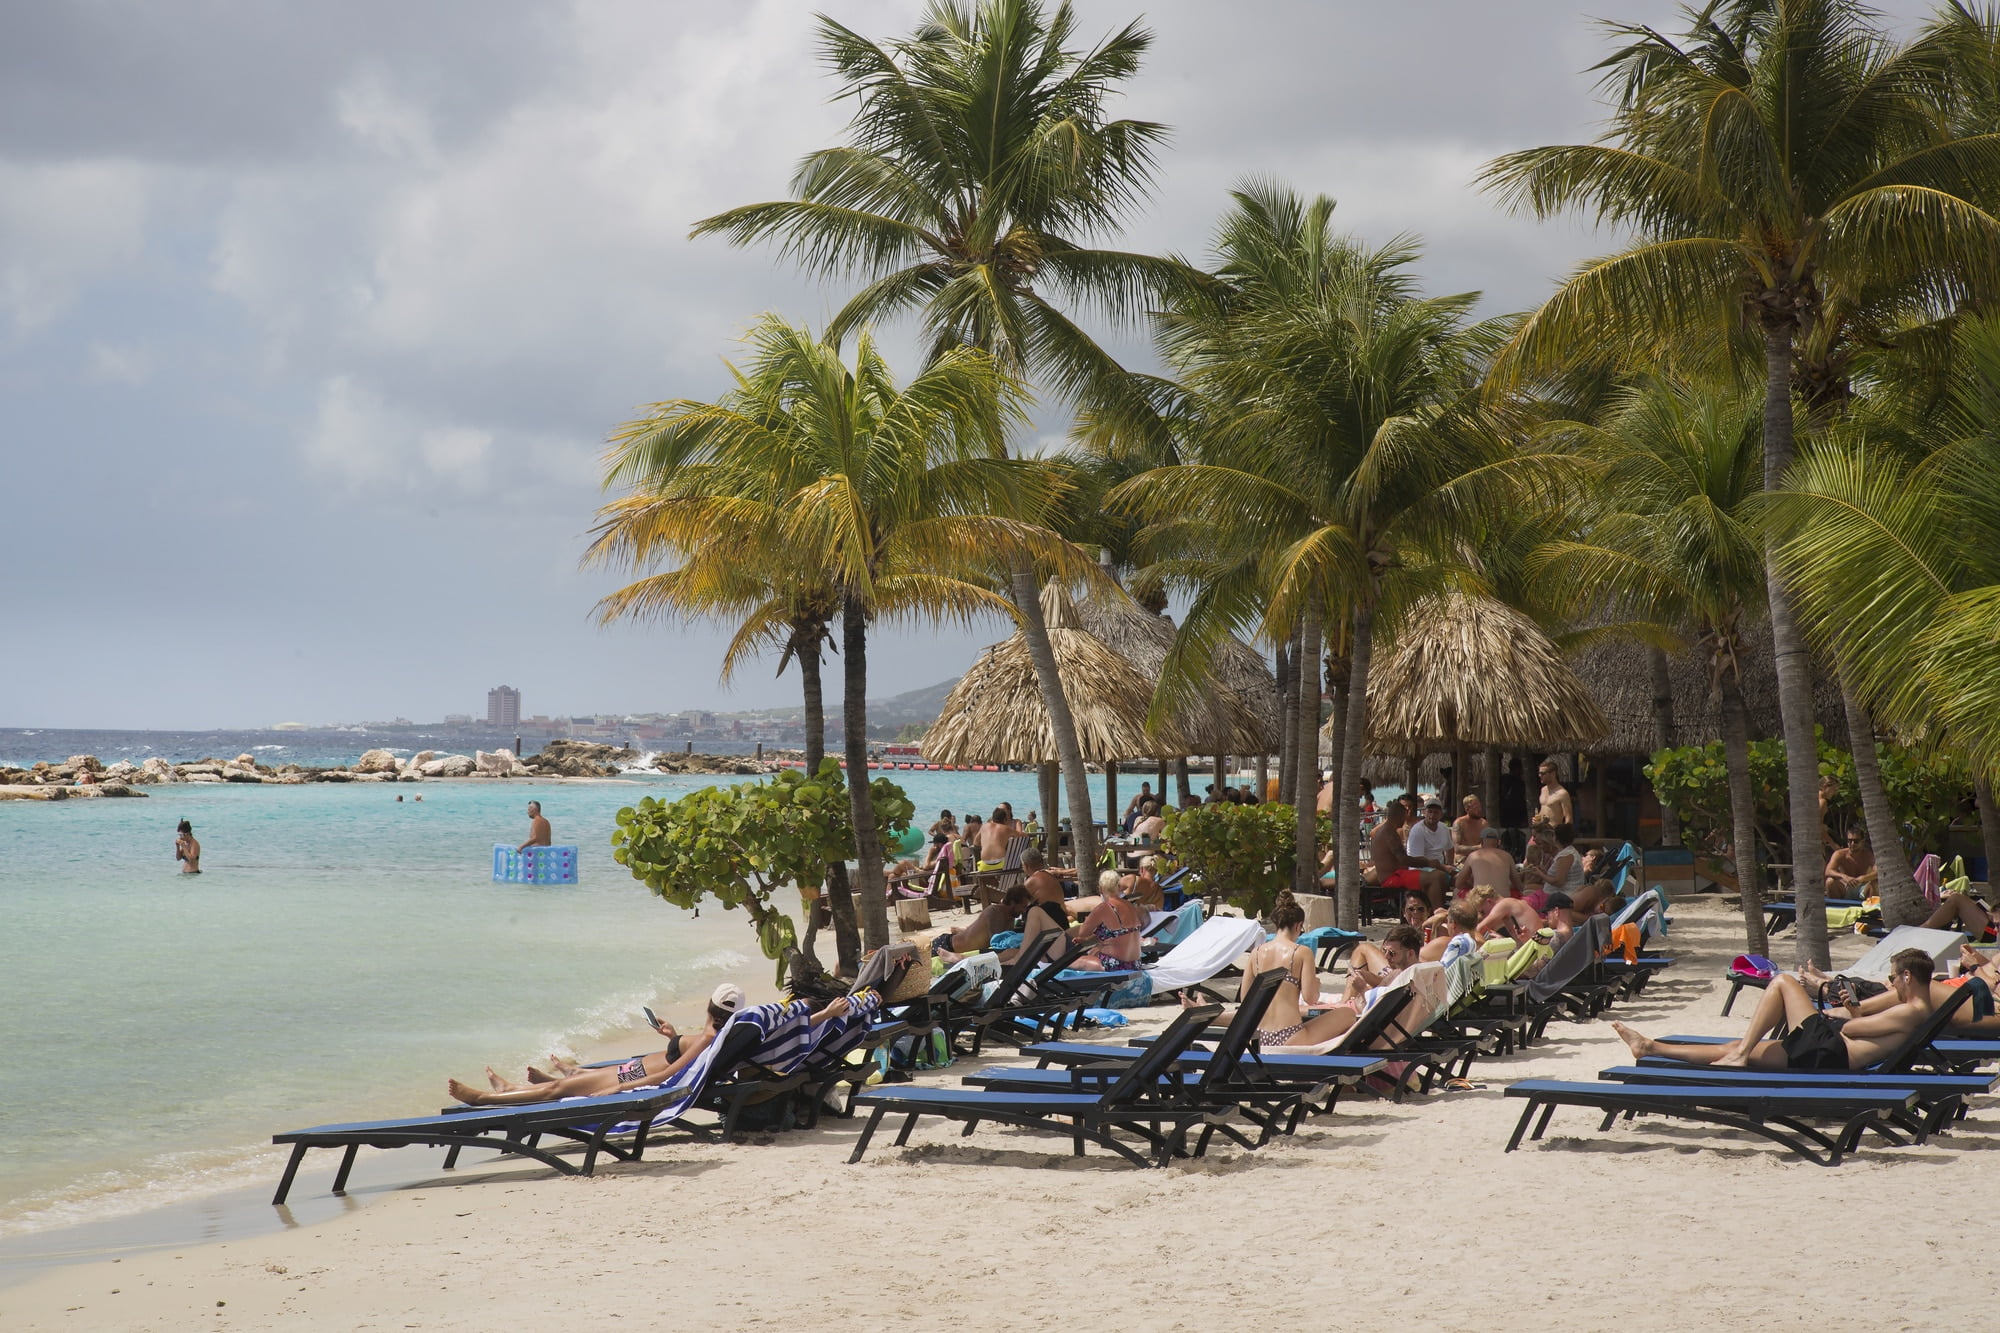 Curacao. Beautiful beach with palm trees and tourists